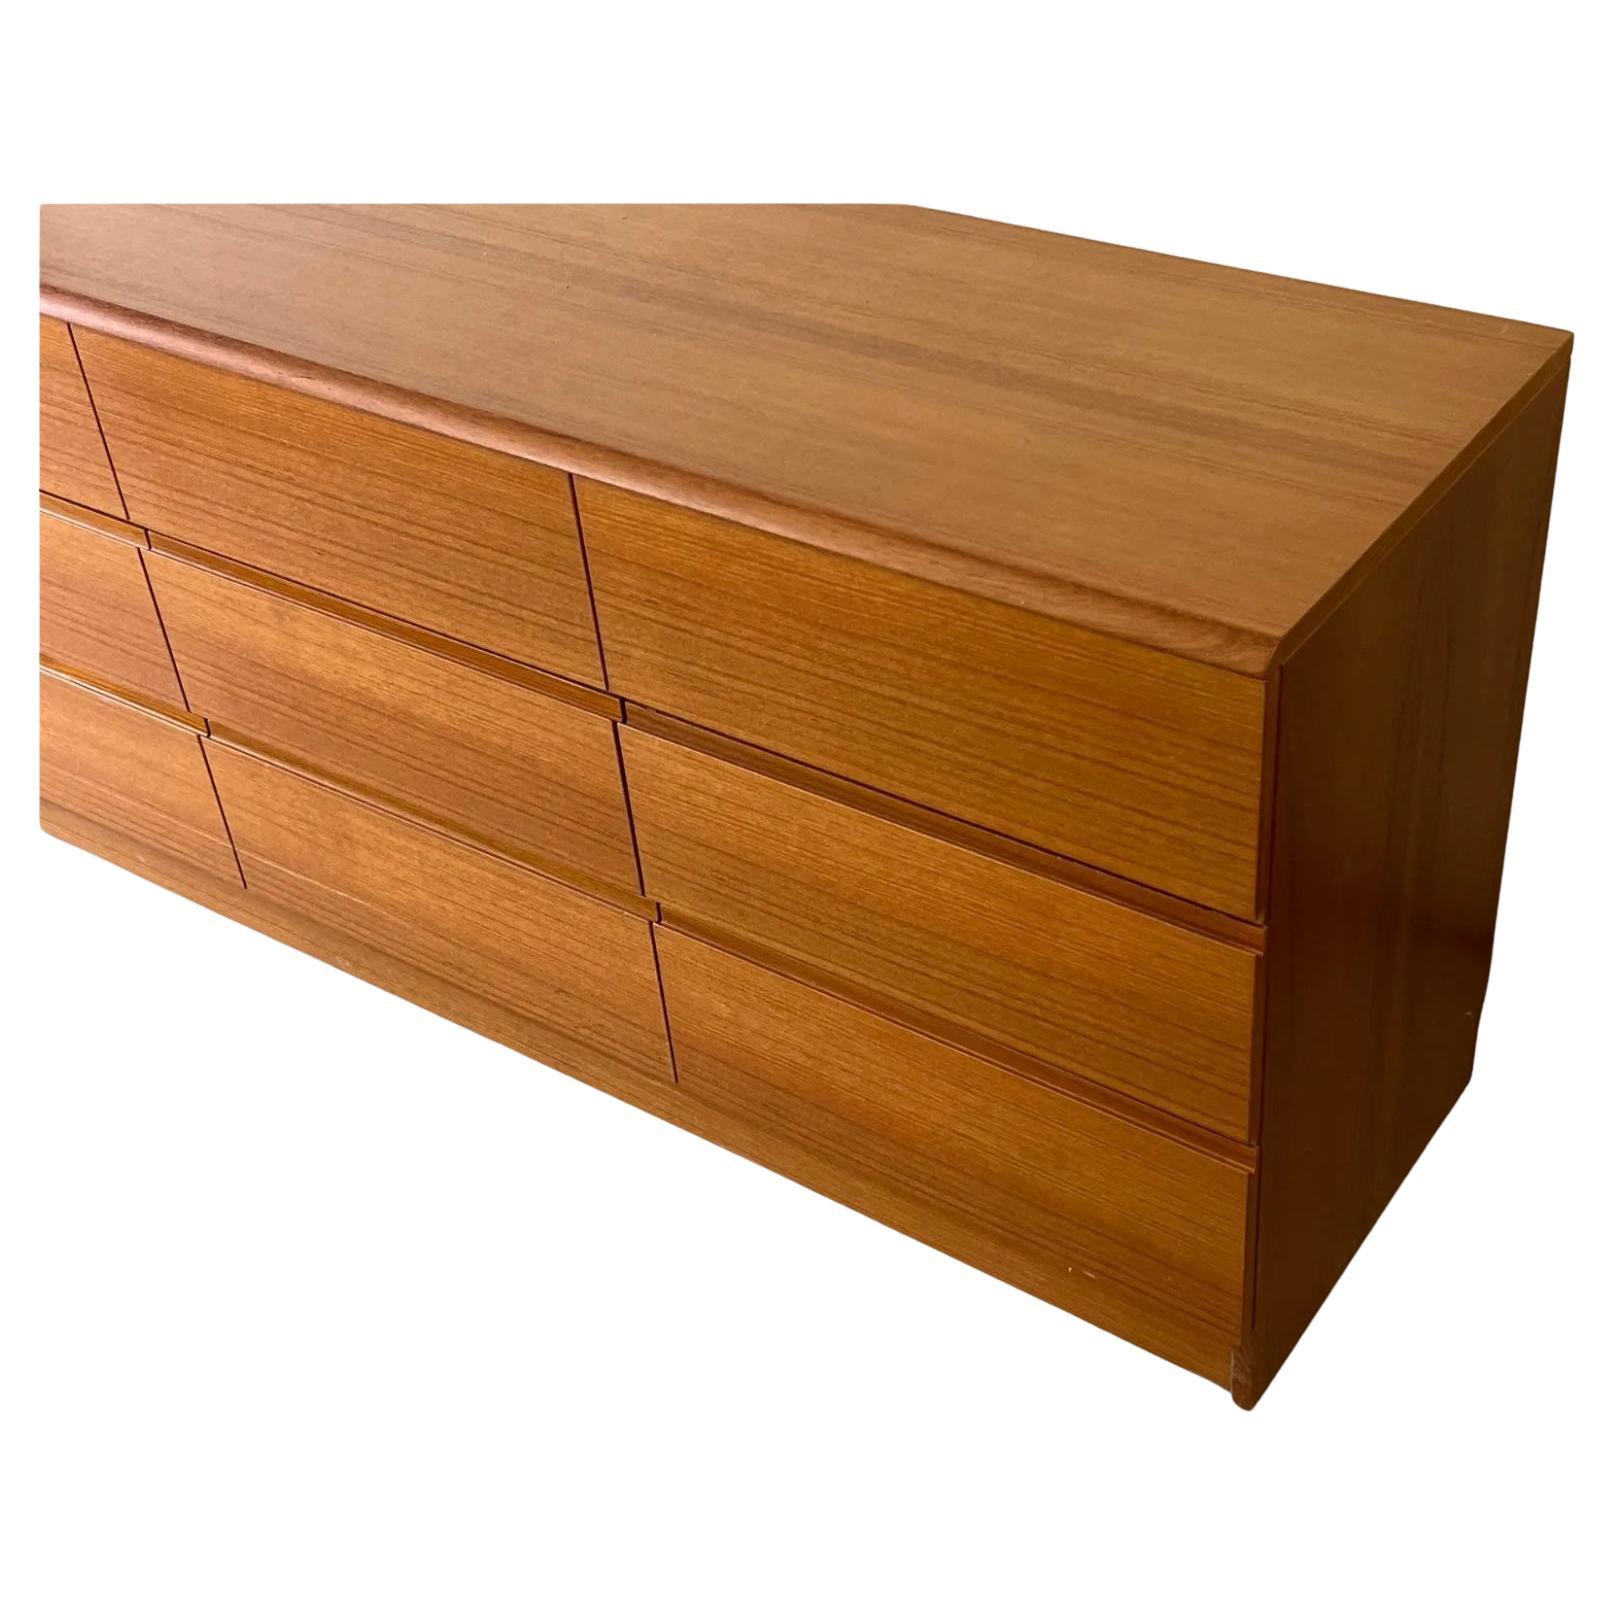 Mid century Danish modern Teak 9 drawer dresser. Clean simple Danish modern dresser with 9 drawers clean inside and out. Has carved lower handle pulls under drawer face. Really beautiful medium brown teak wood with very nice grain. Made in Denmark.